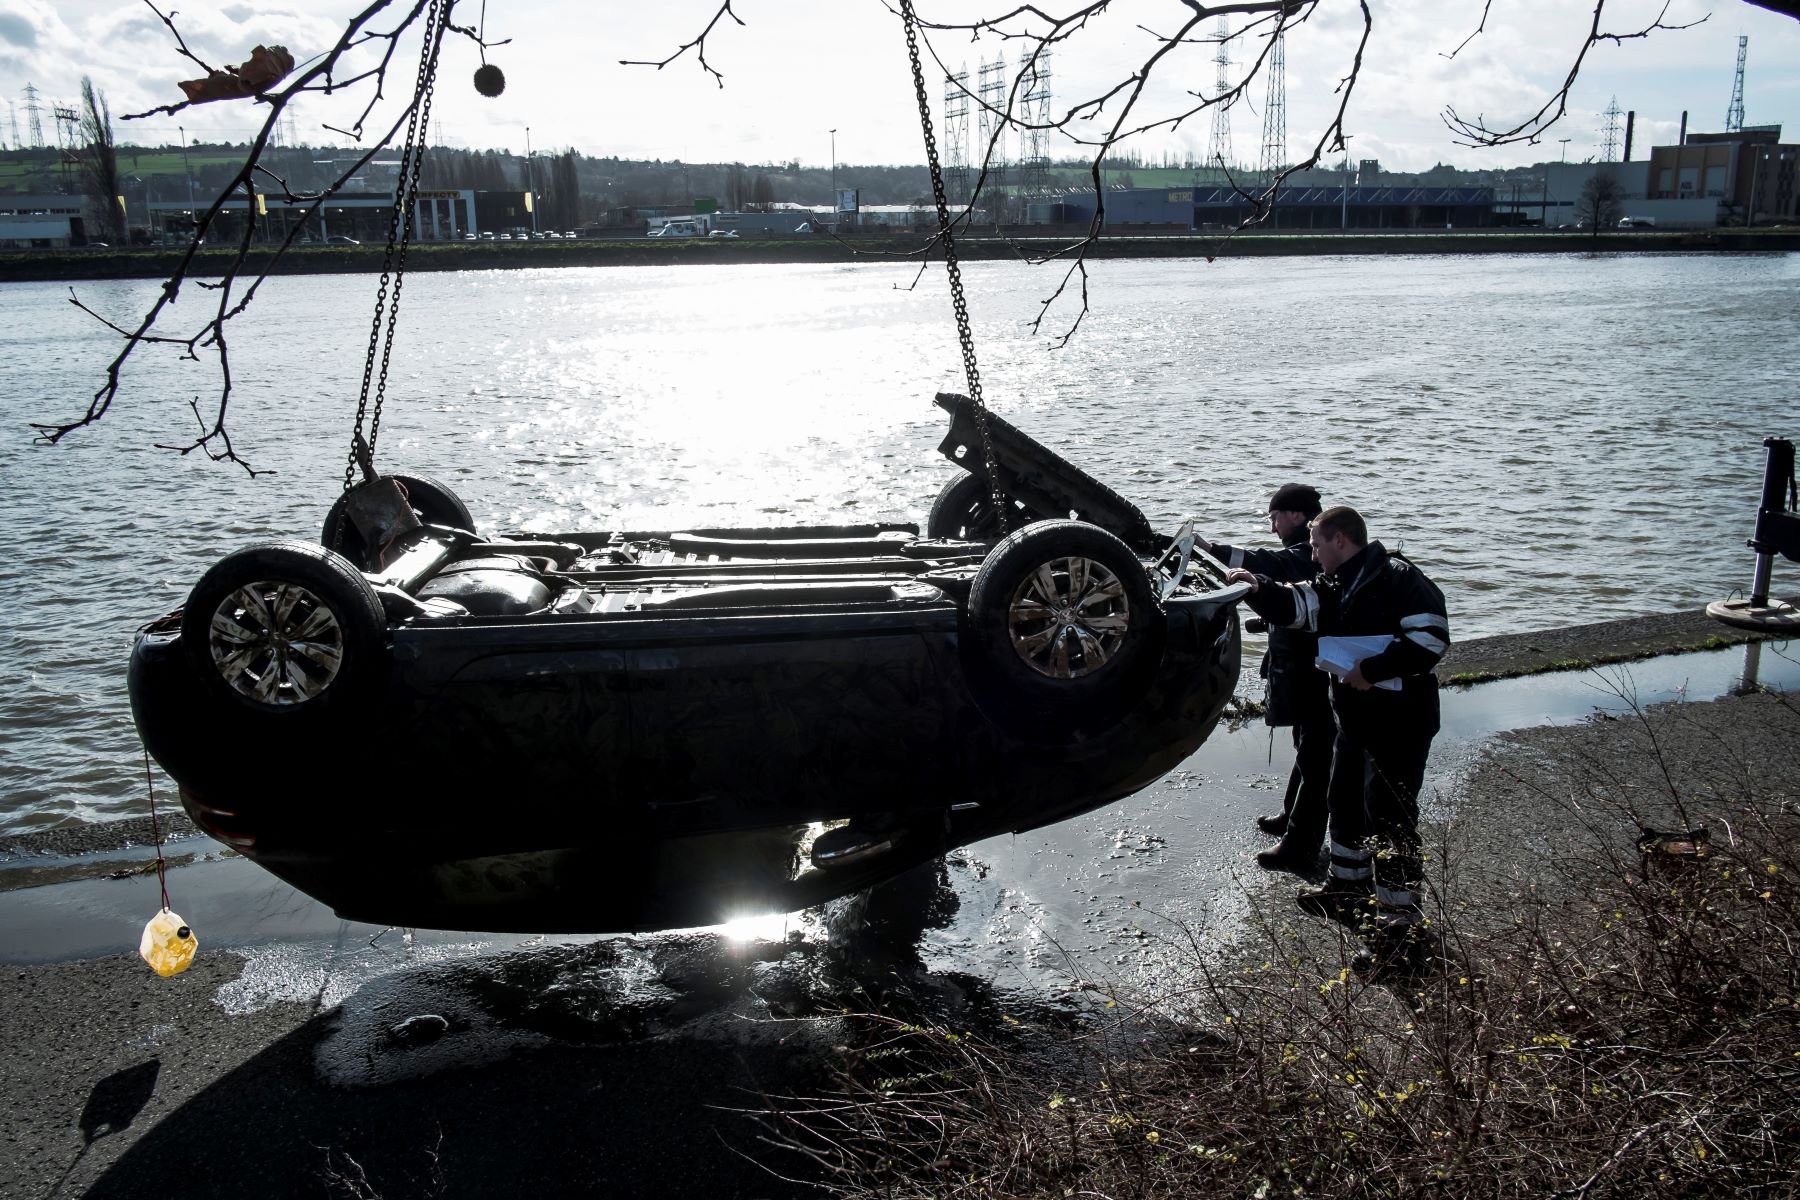 A crane pulling a car from the Meuse River in Liege, Belgium for a missing persons case